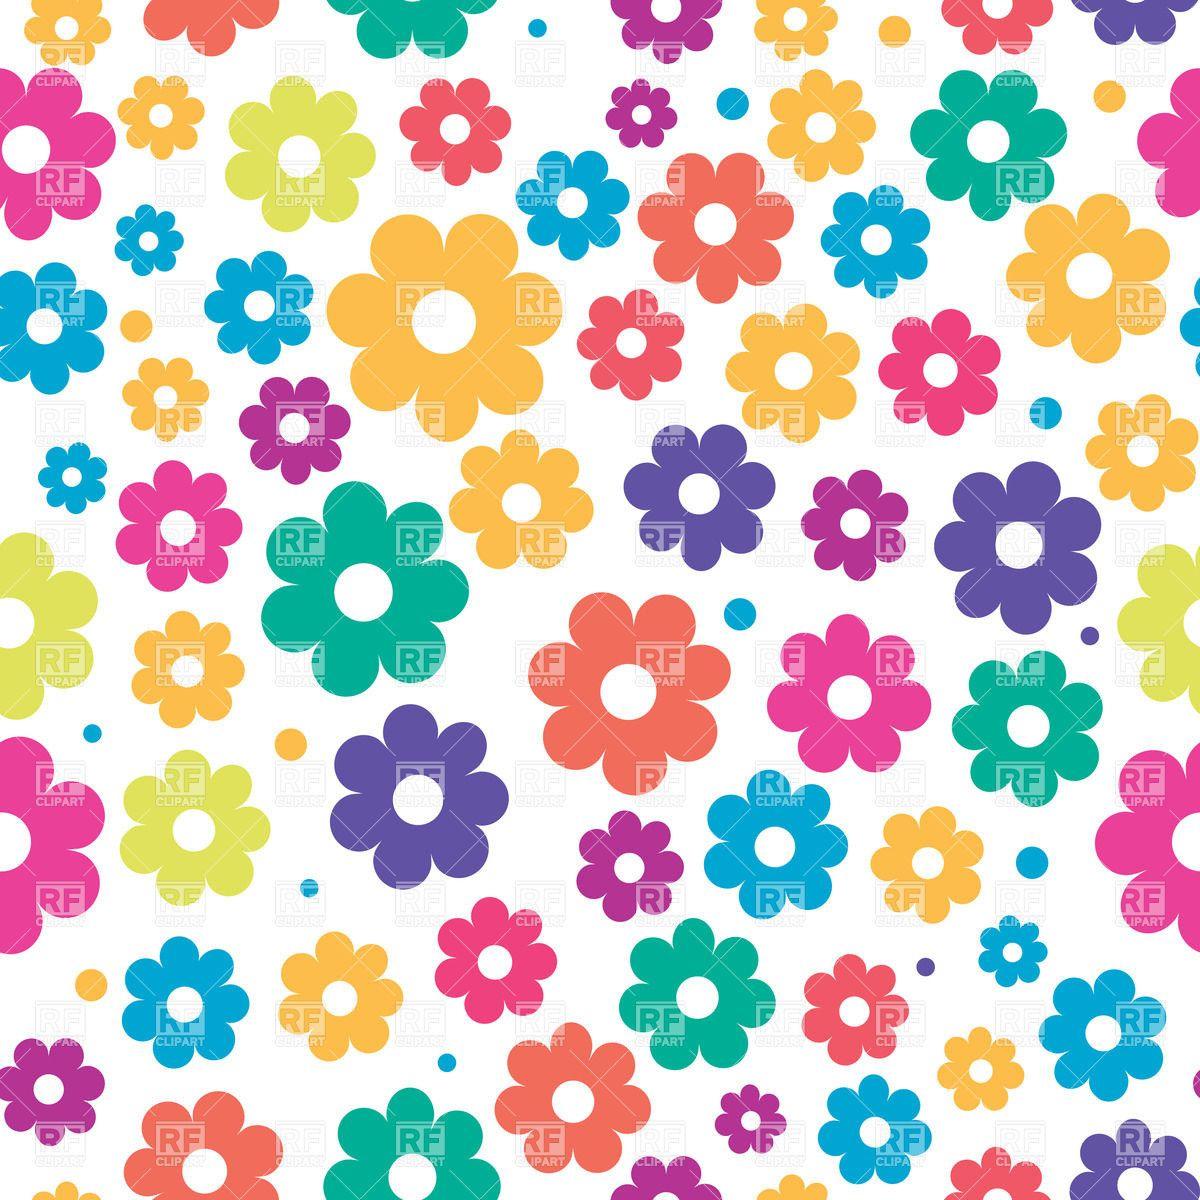 Cute Wallpaper Clipart image picture. Free Download